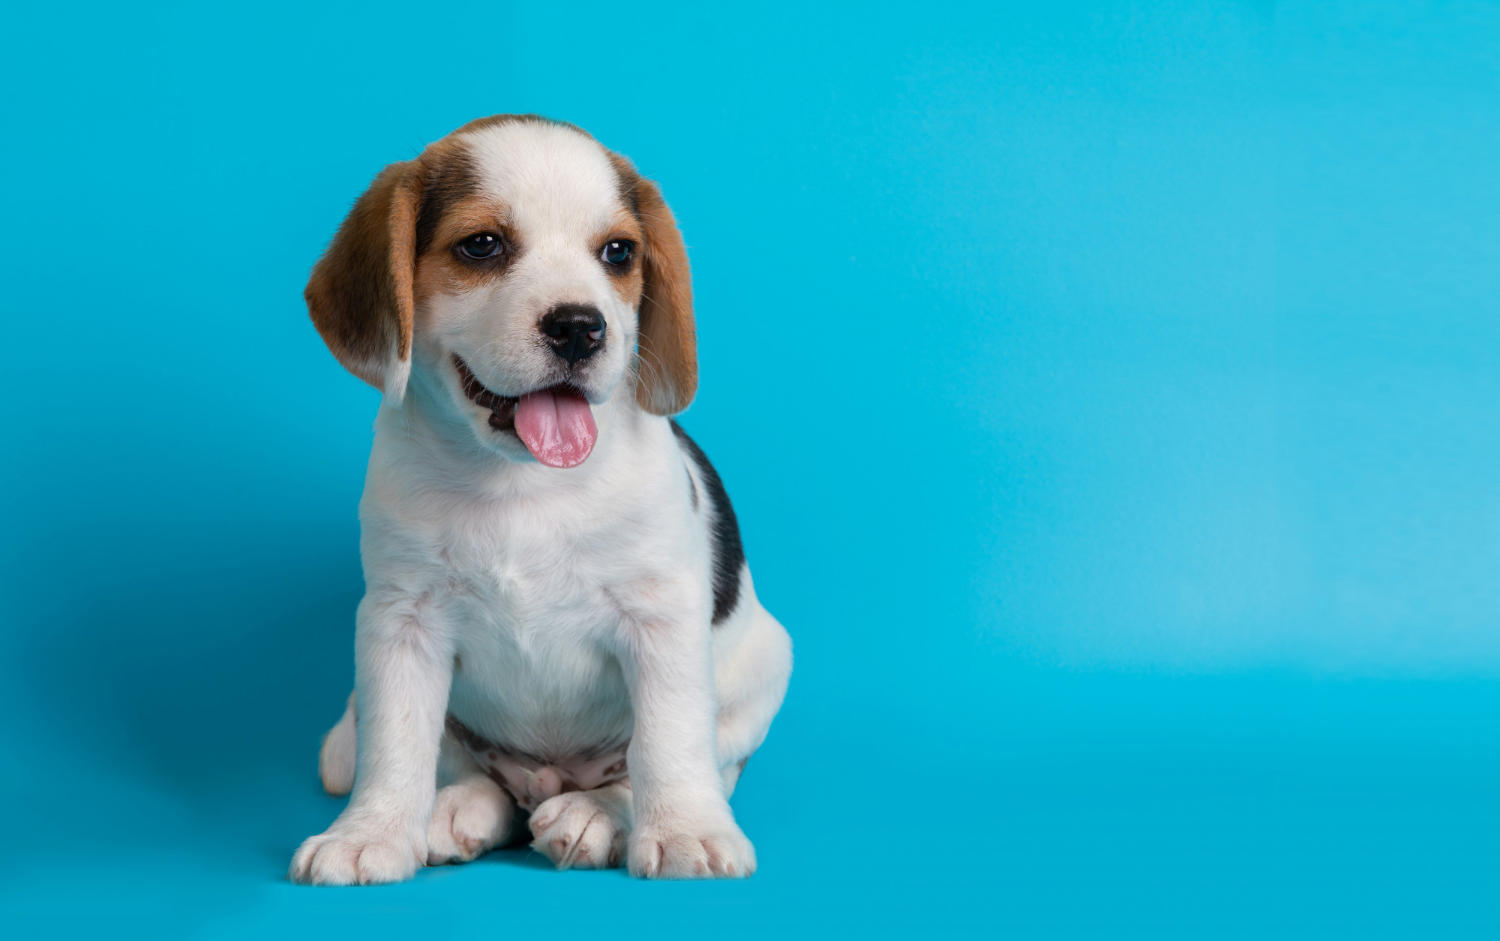 How Long is the Average Lifespan for a Beagle? A Guide to Beagle Lifespans